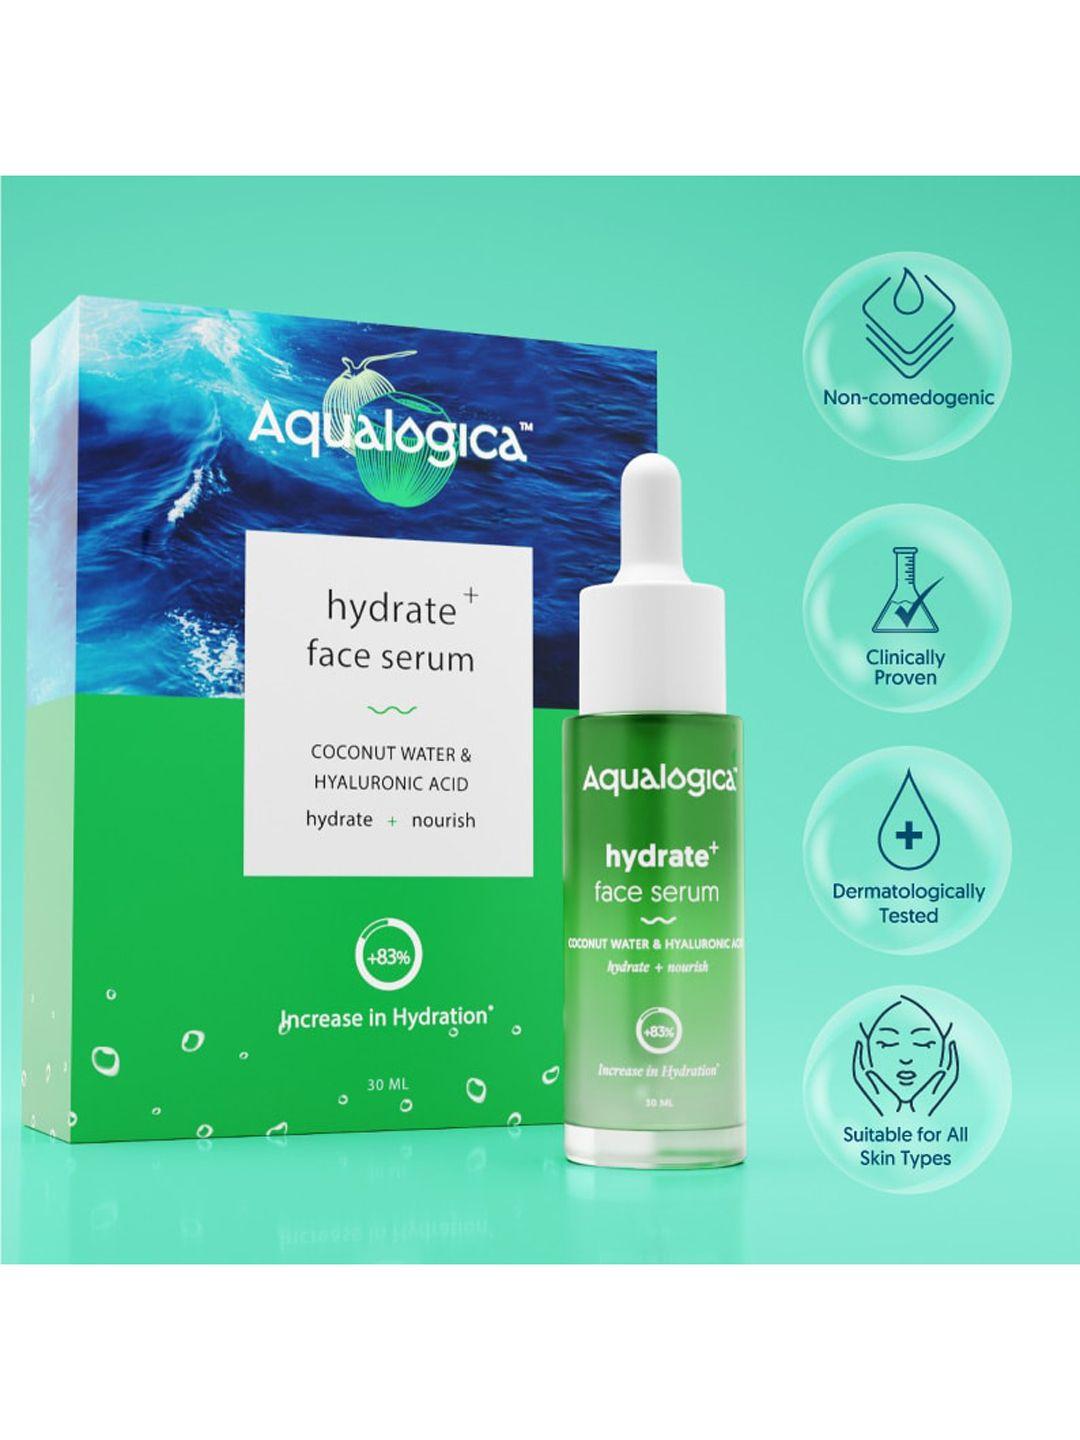 aqualogica hydrate+ face serum with coconut water & hyaluronic acid - 30ml